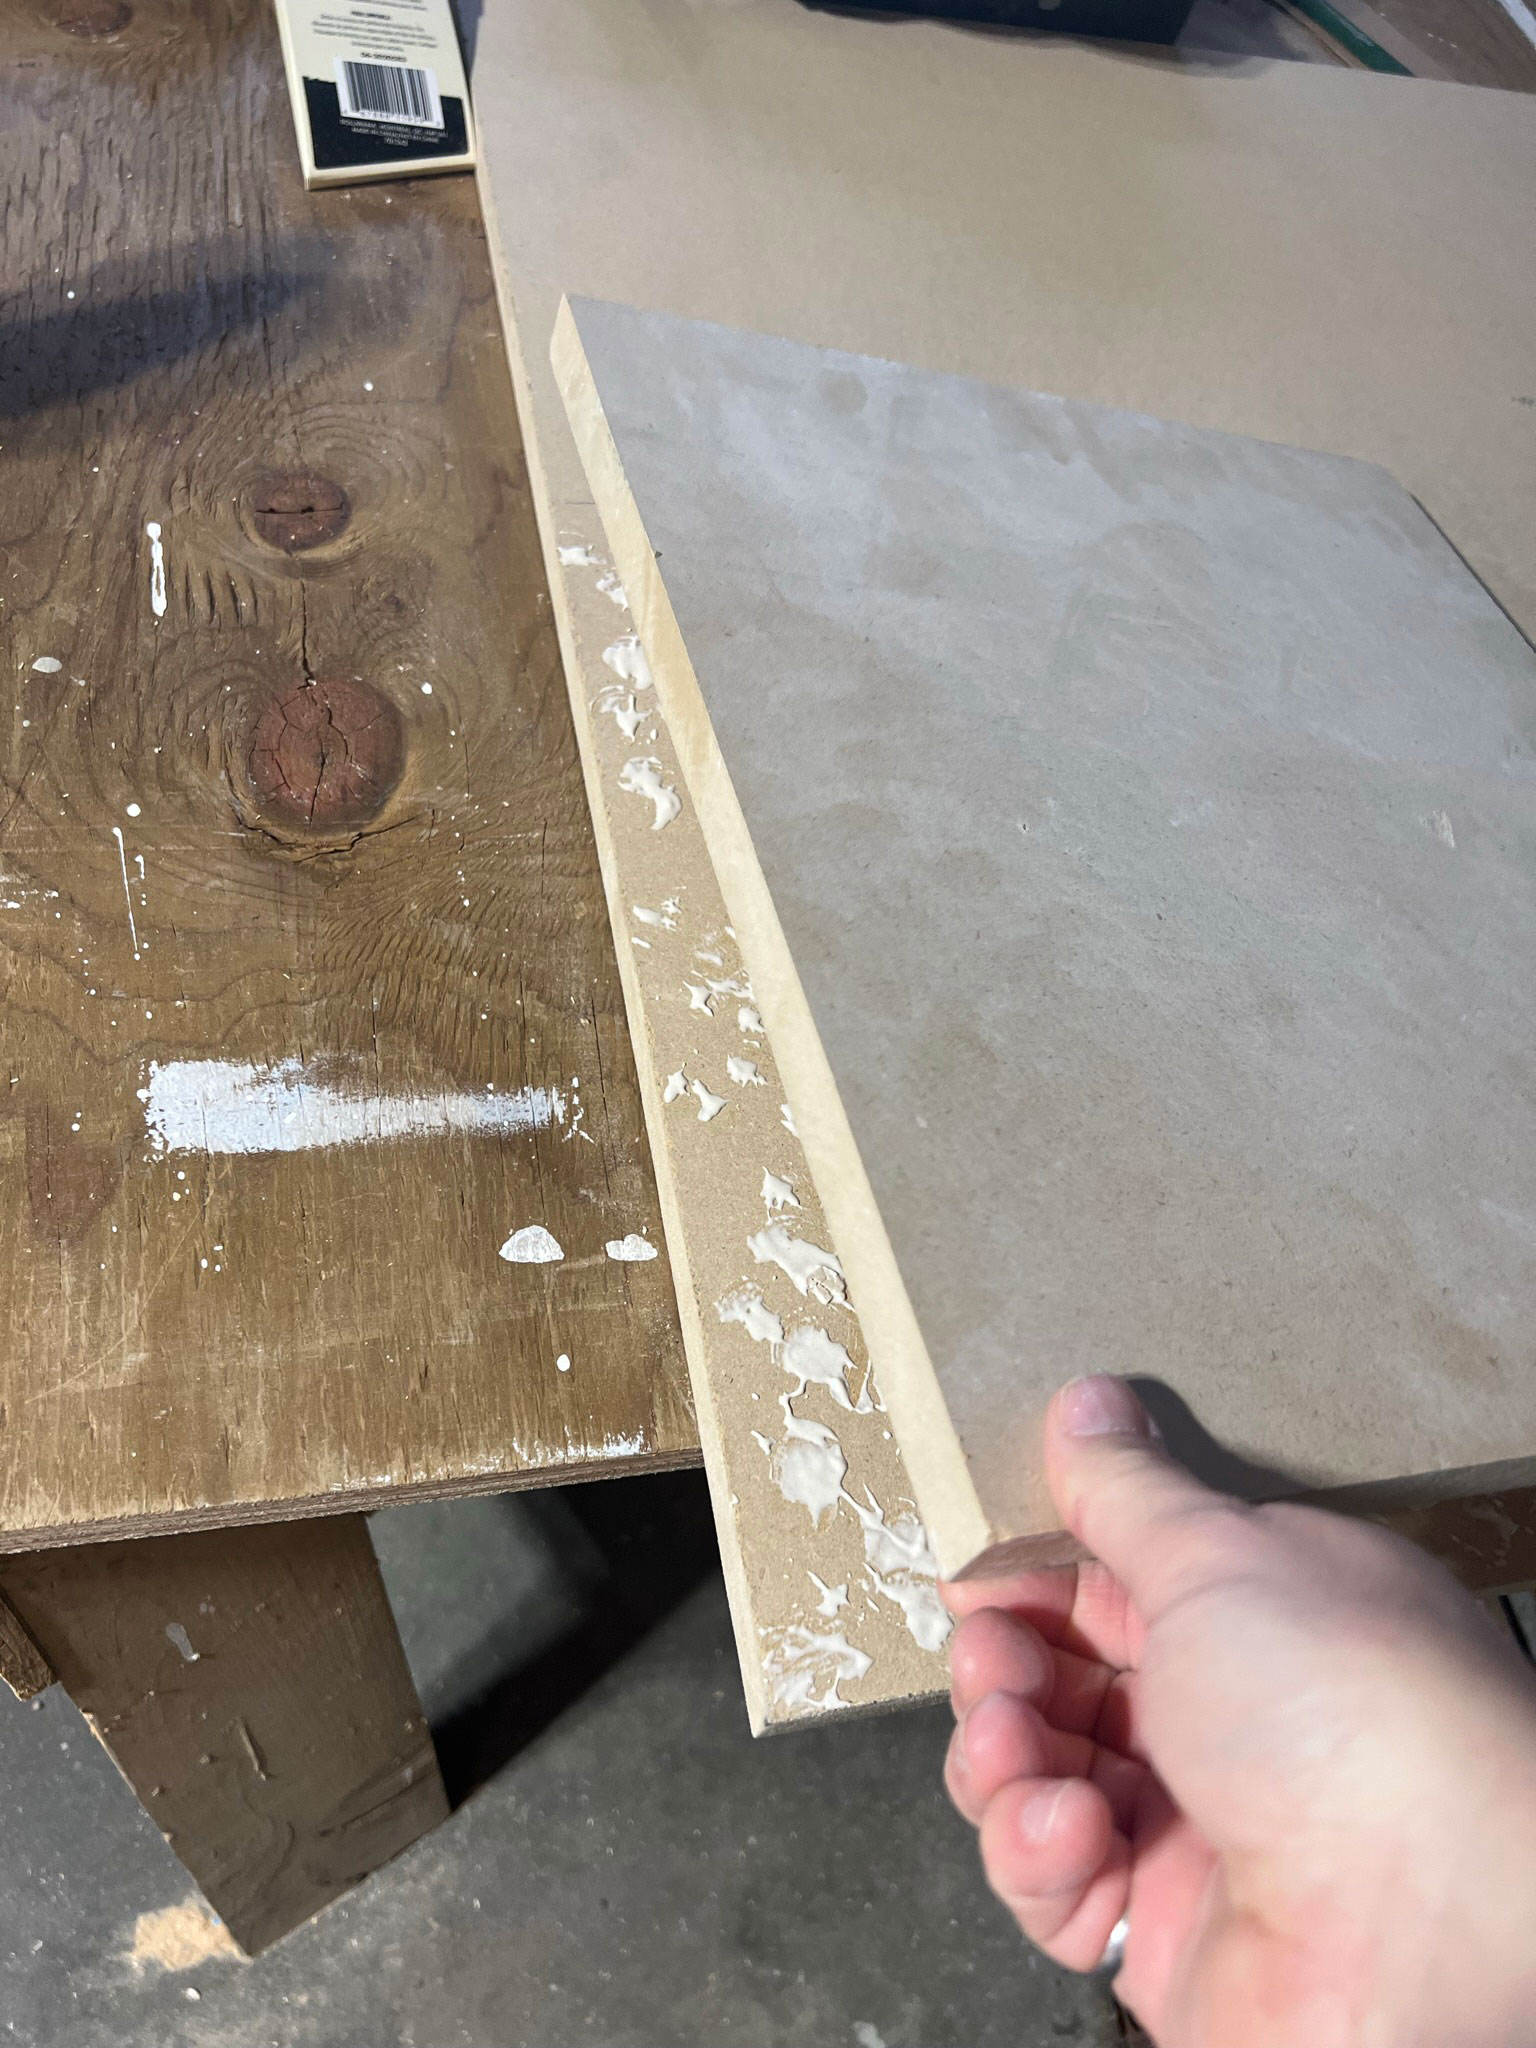 adding a second piece of MDF to the glue on the first piece of MDF